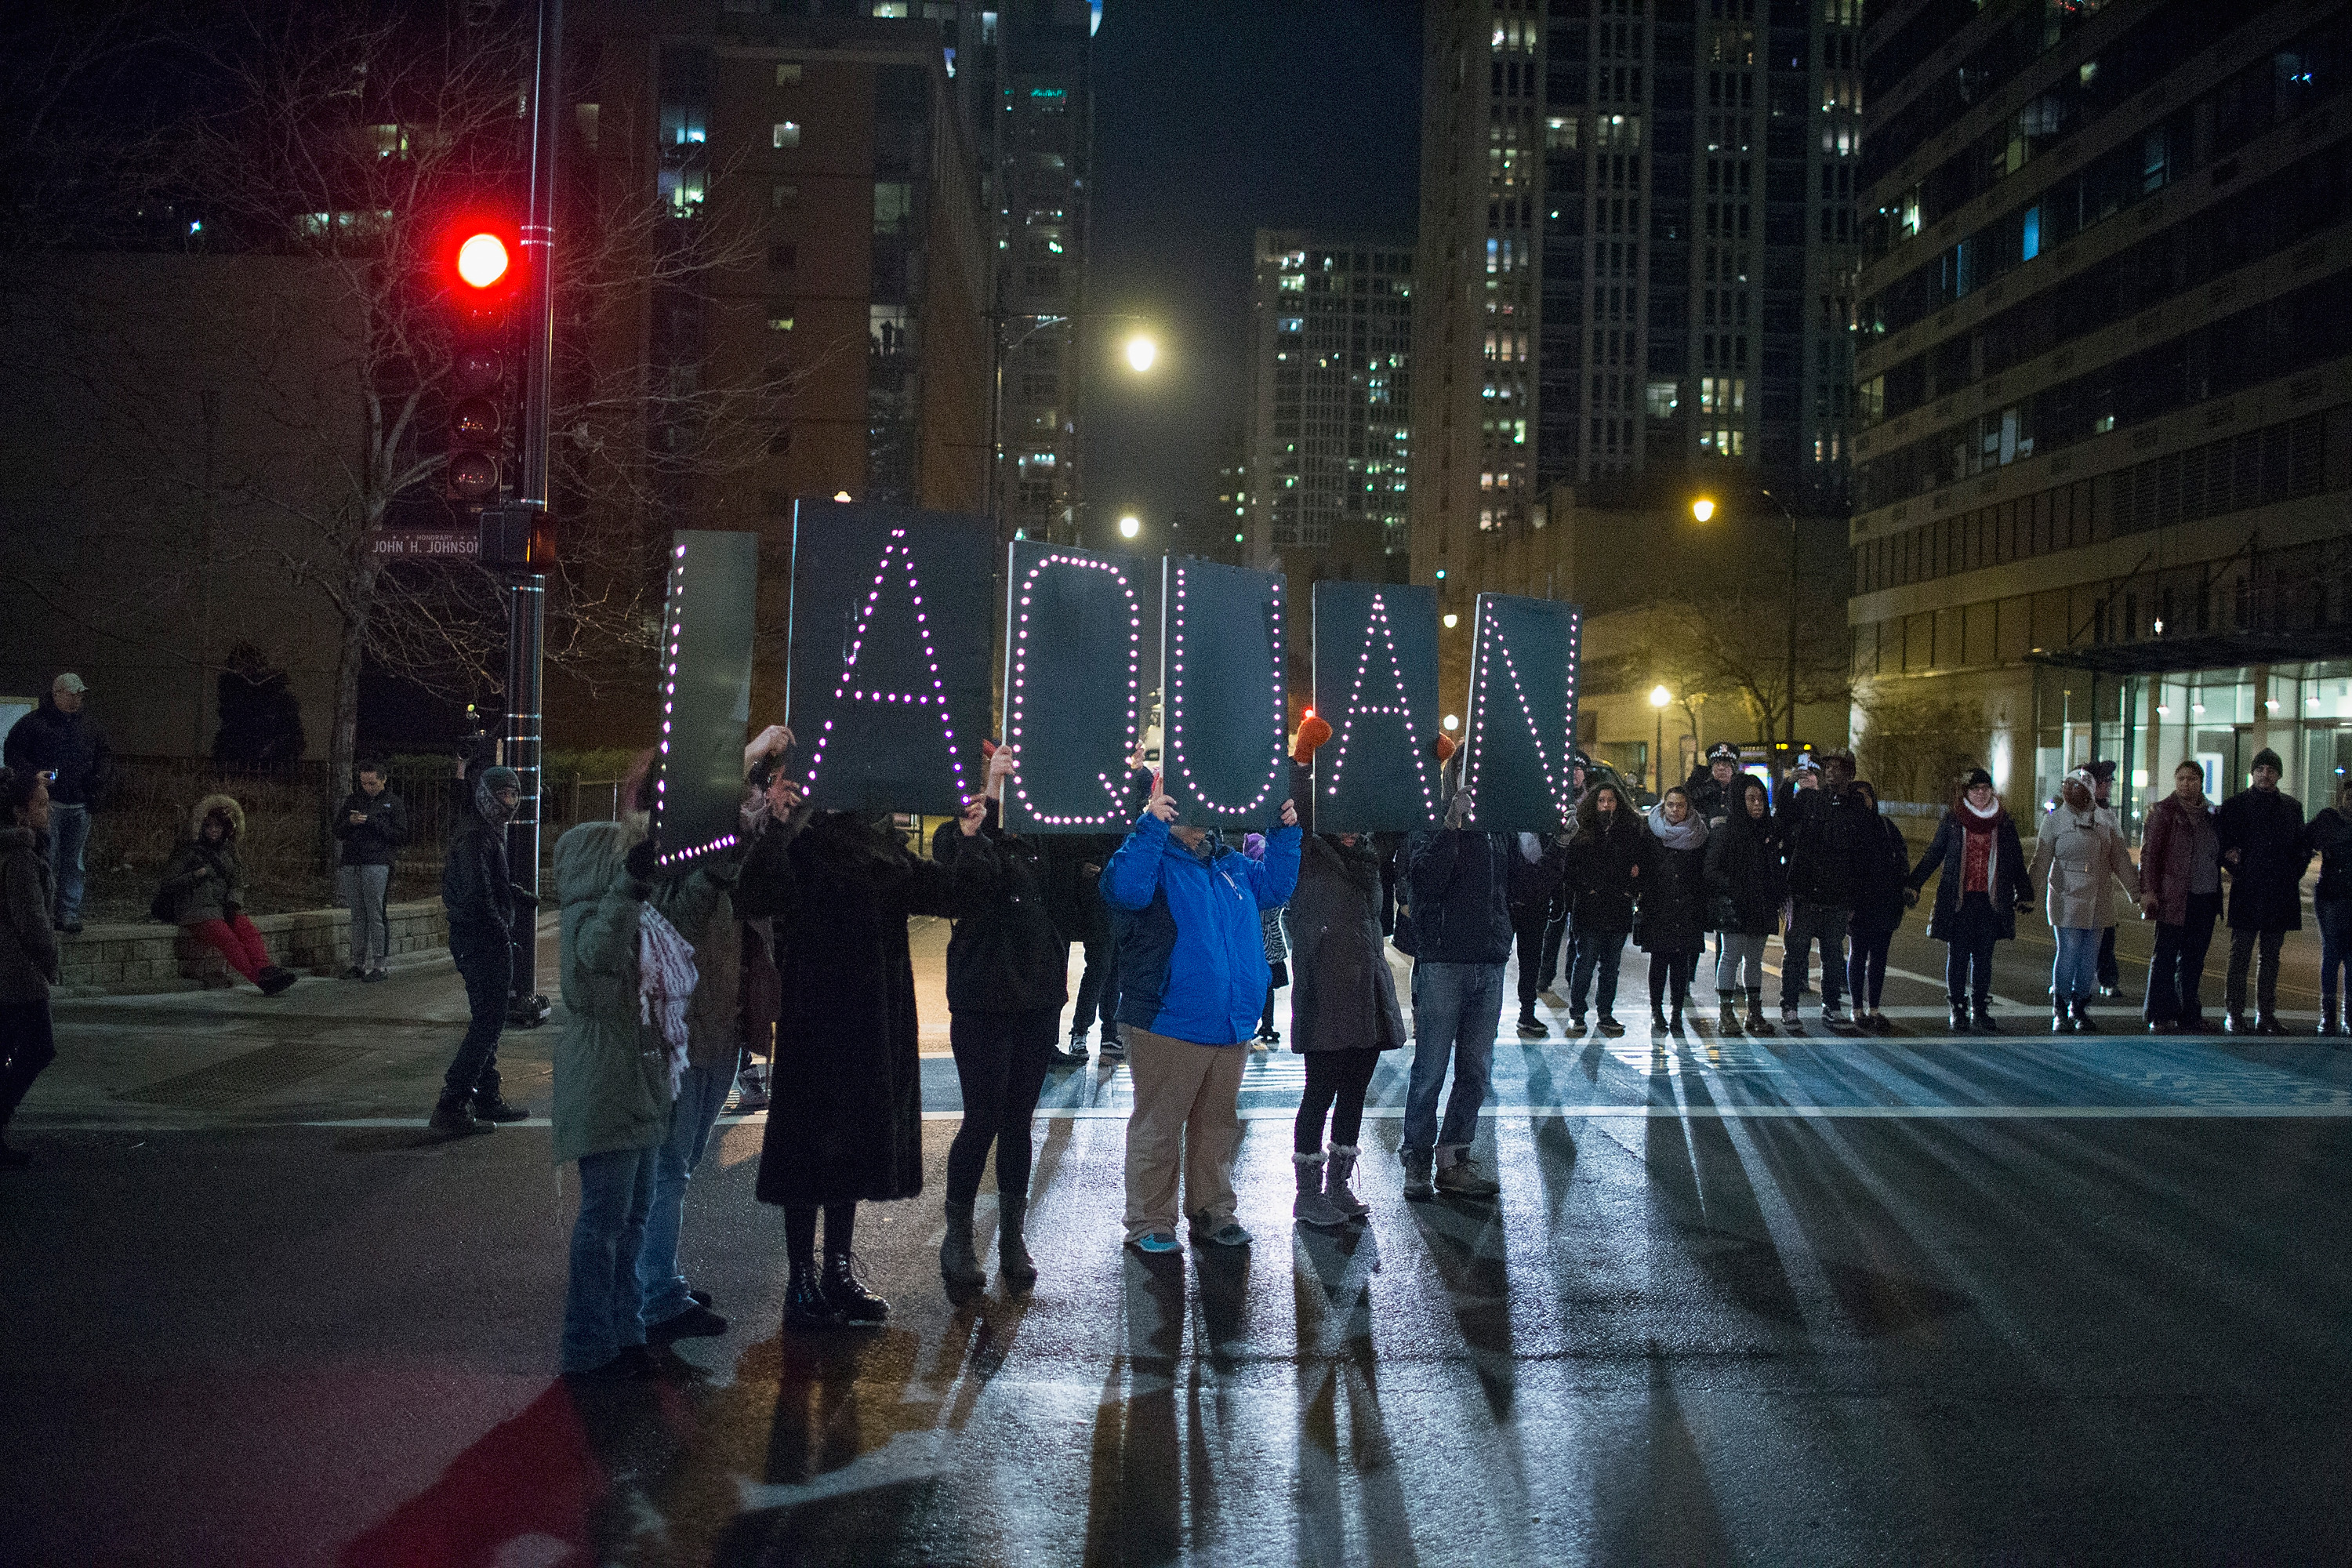 7 Chicago Cops Implicated in Alleged Cover-Up of Laquan McDonald Shooting